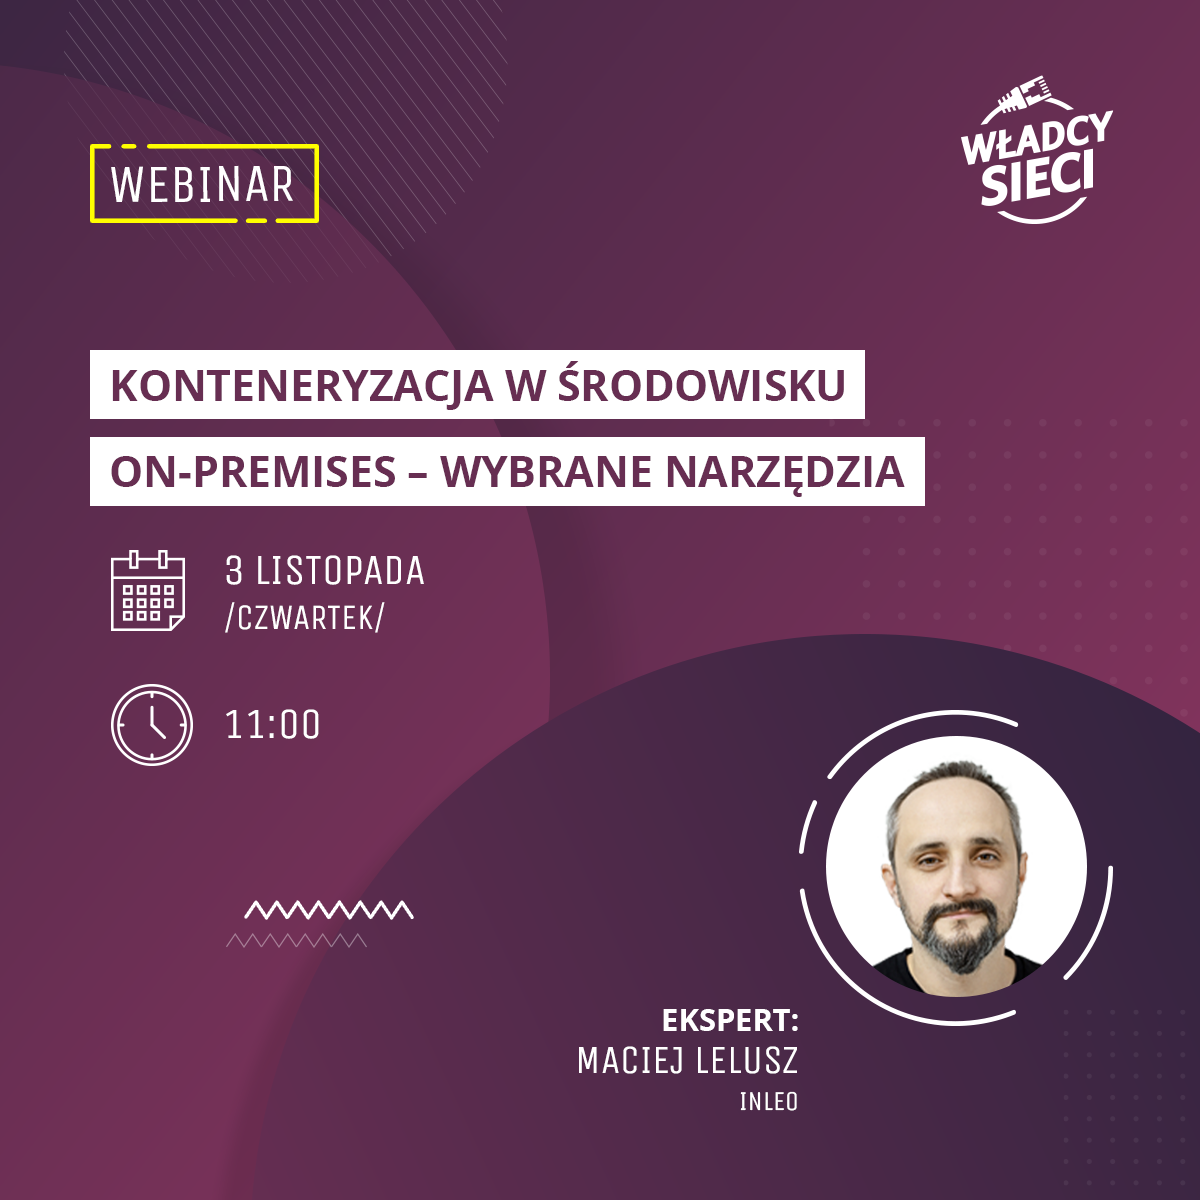 Władcy Sieci - webinar about containers